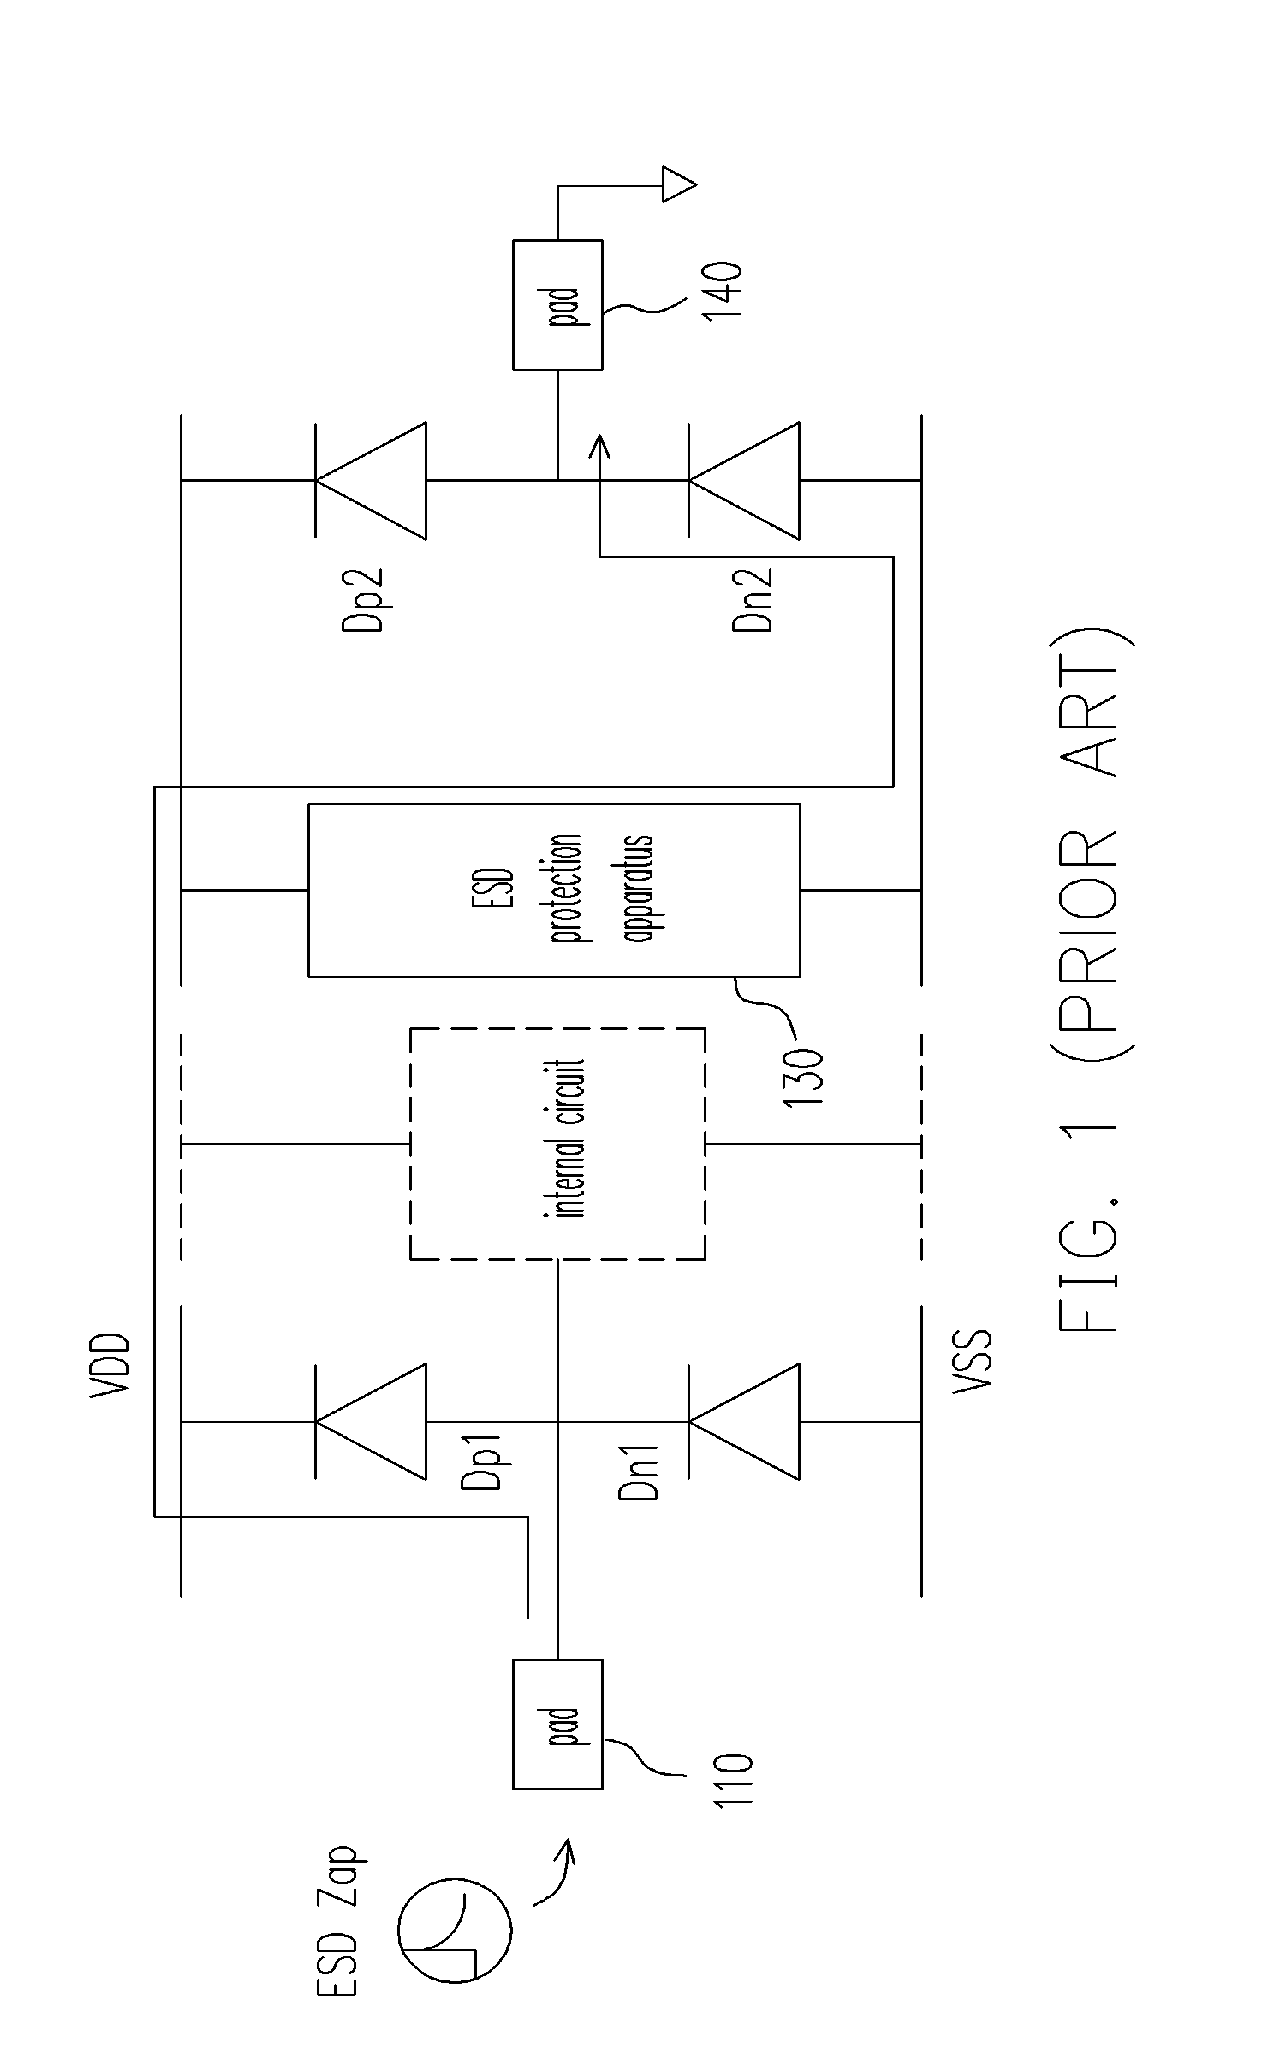 Electrostatic discharge protection apparatus for high-voltage products